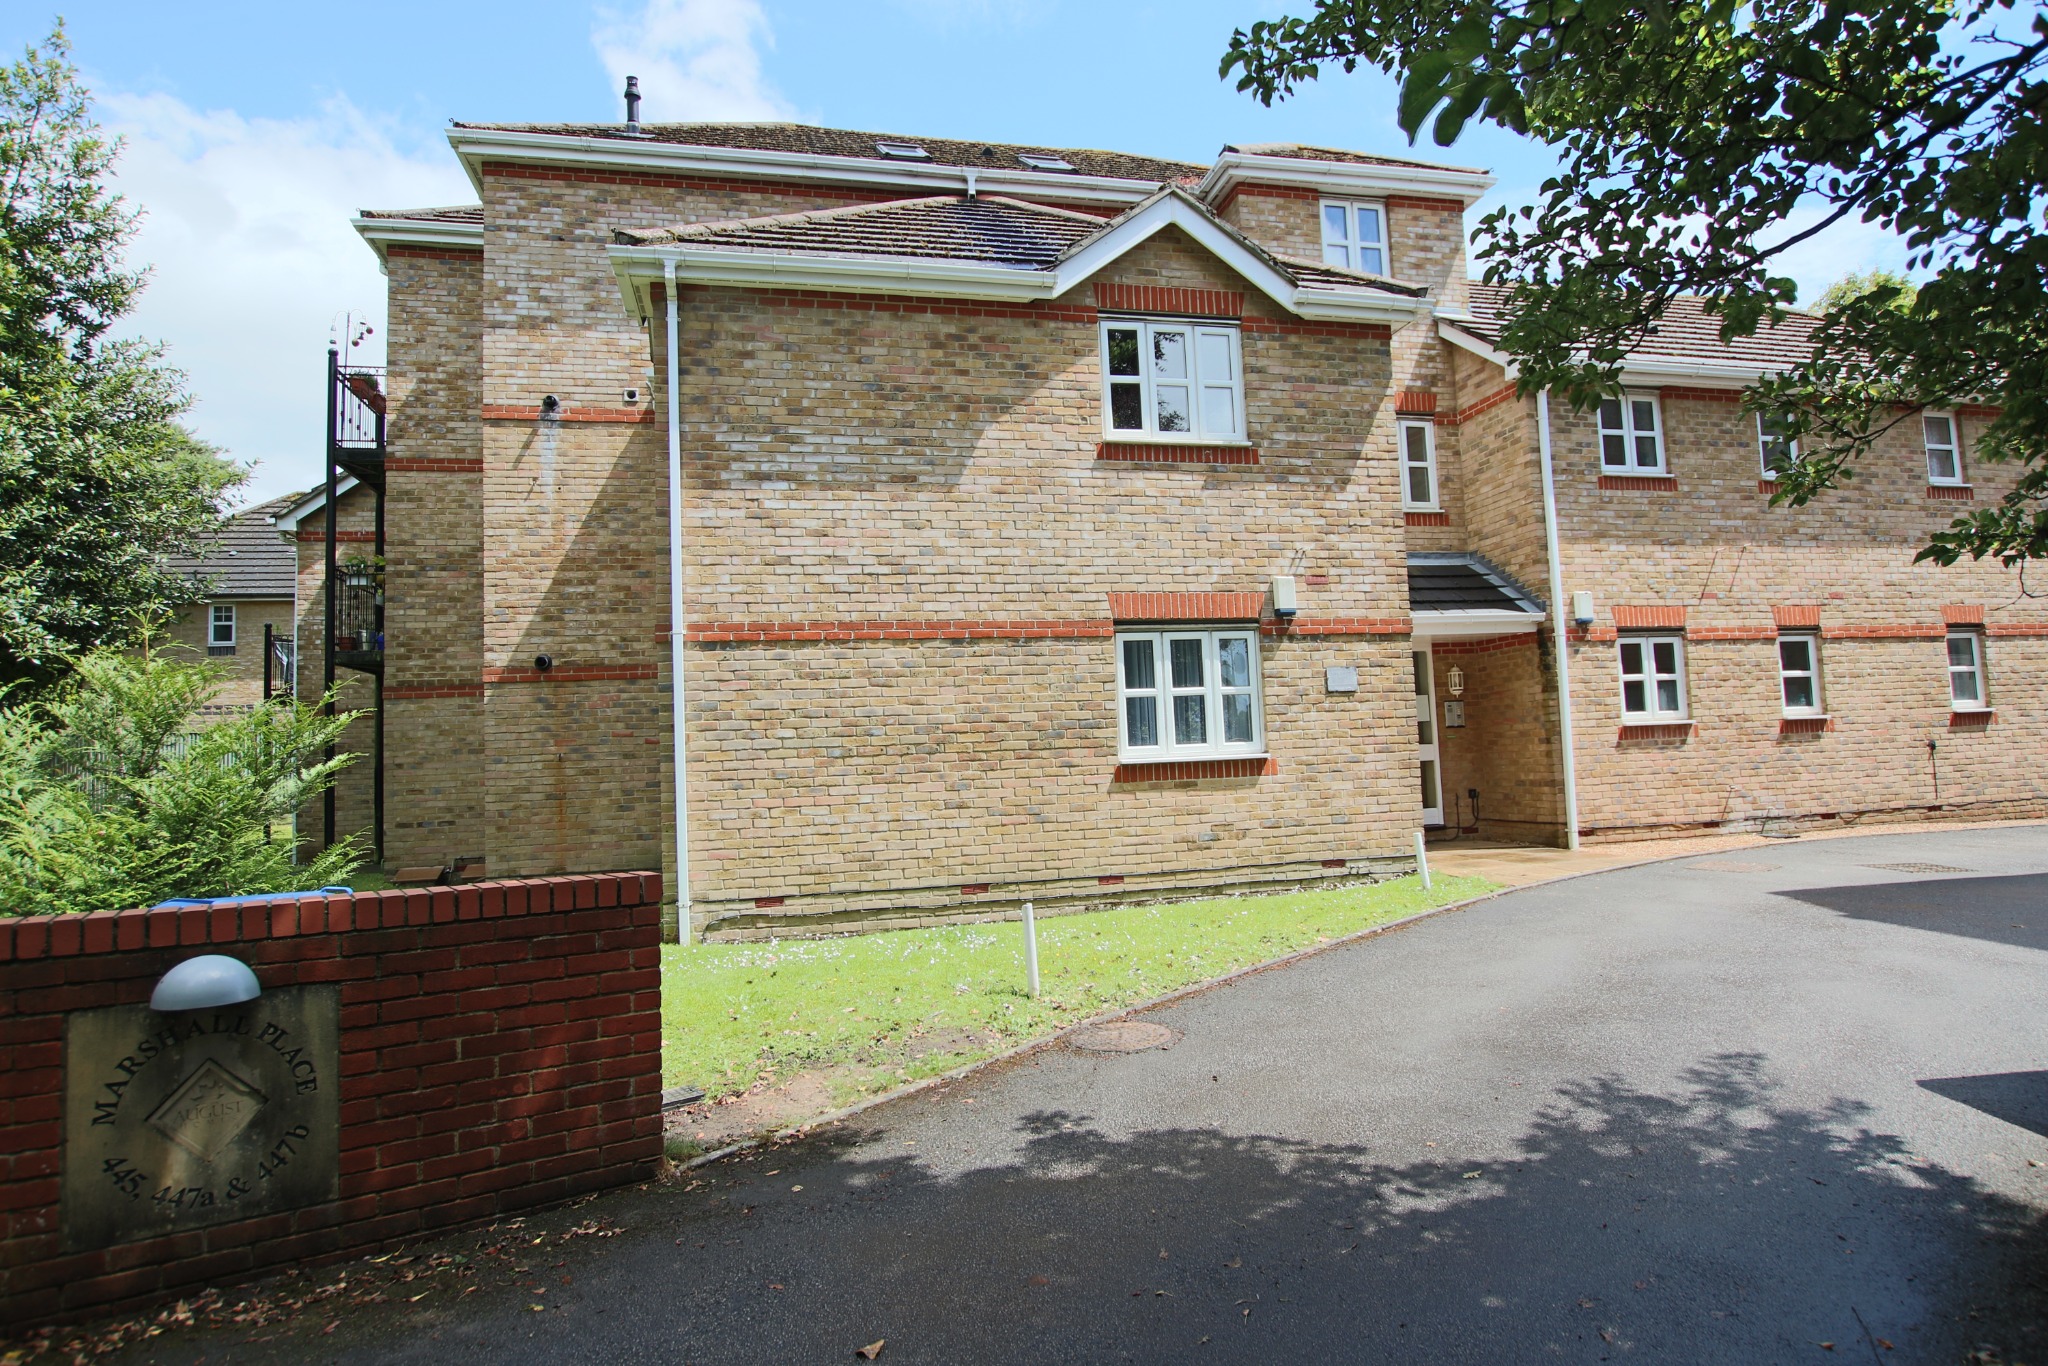 2 bed Apartment for rent in Southampton. From Pearsons estate Agents - Southampton